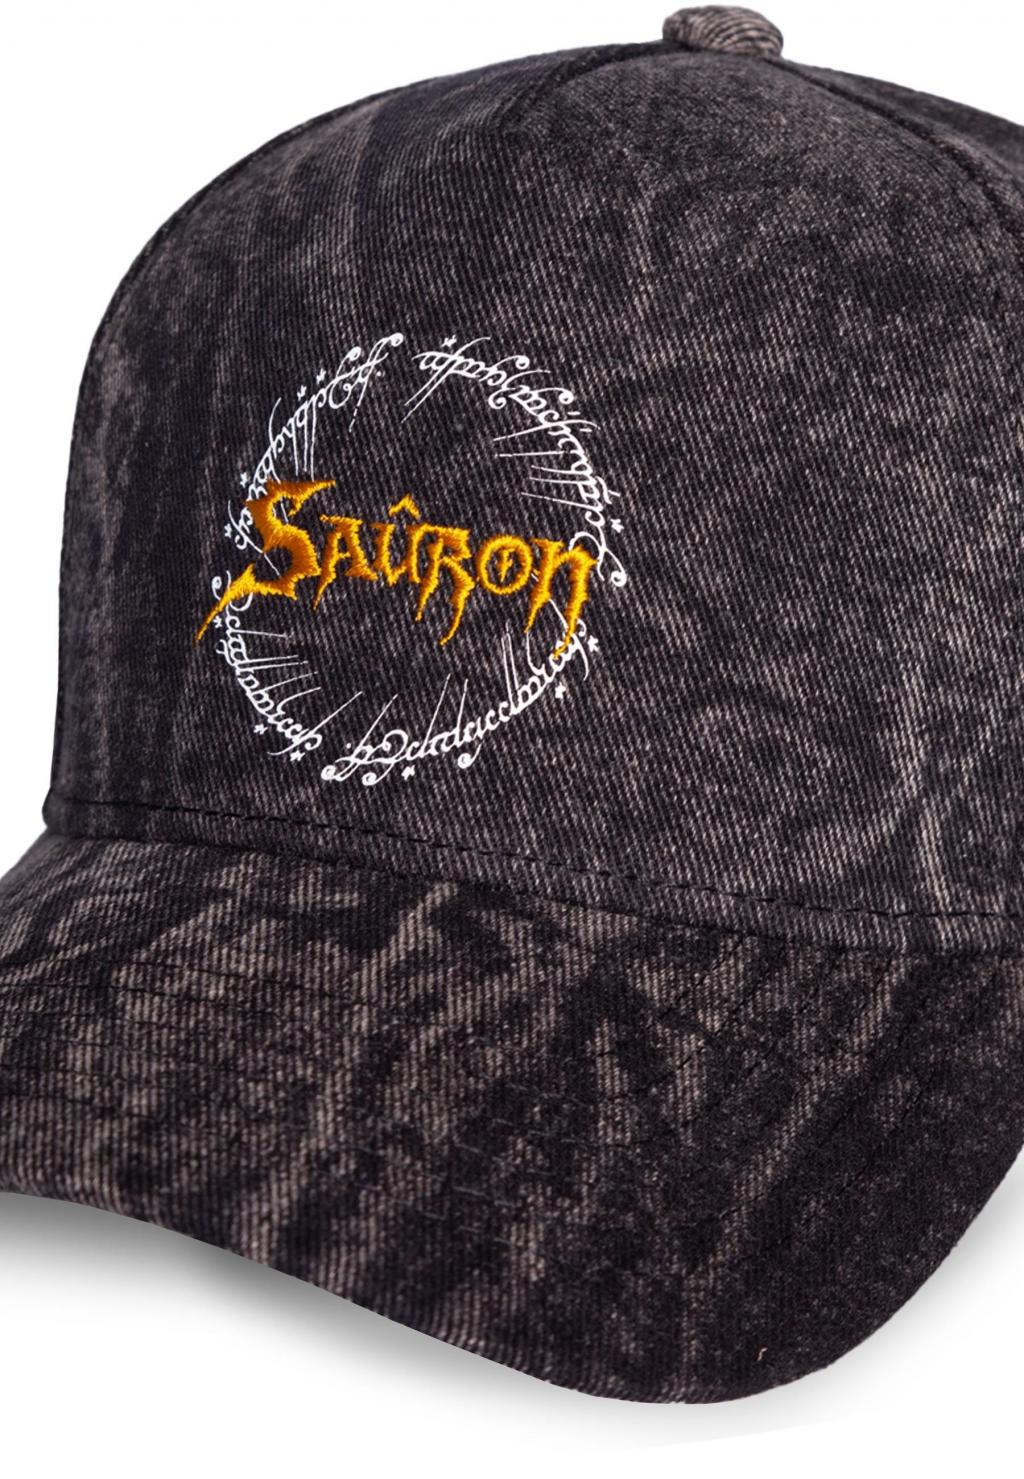 LORD OF THE RINGS - Sauron - Adjustable Cap